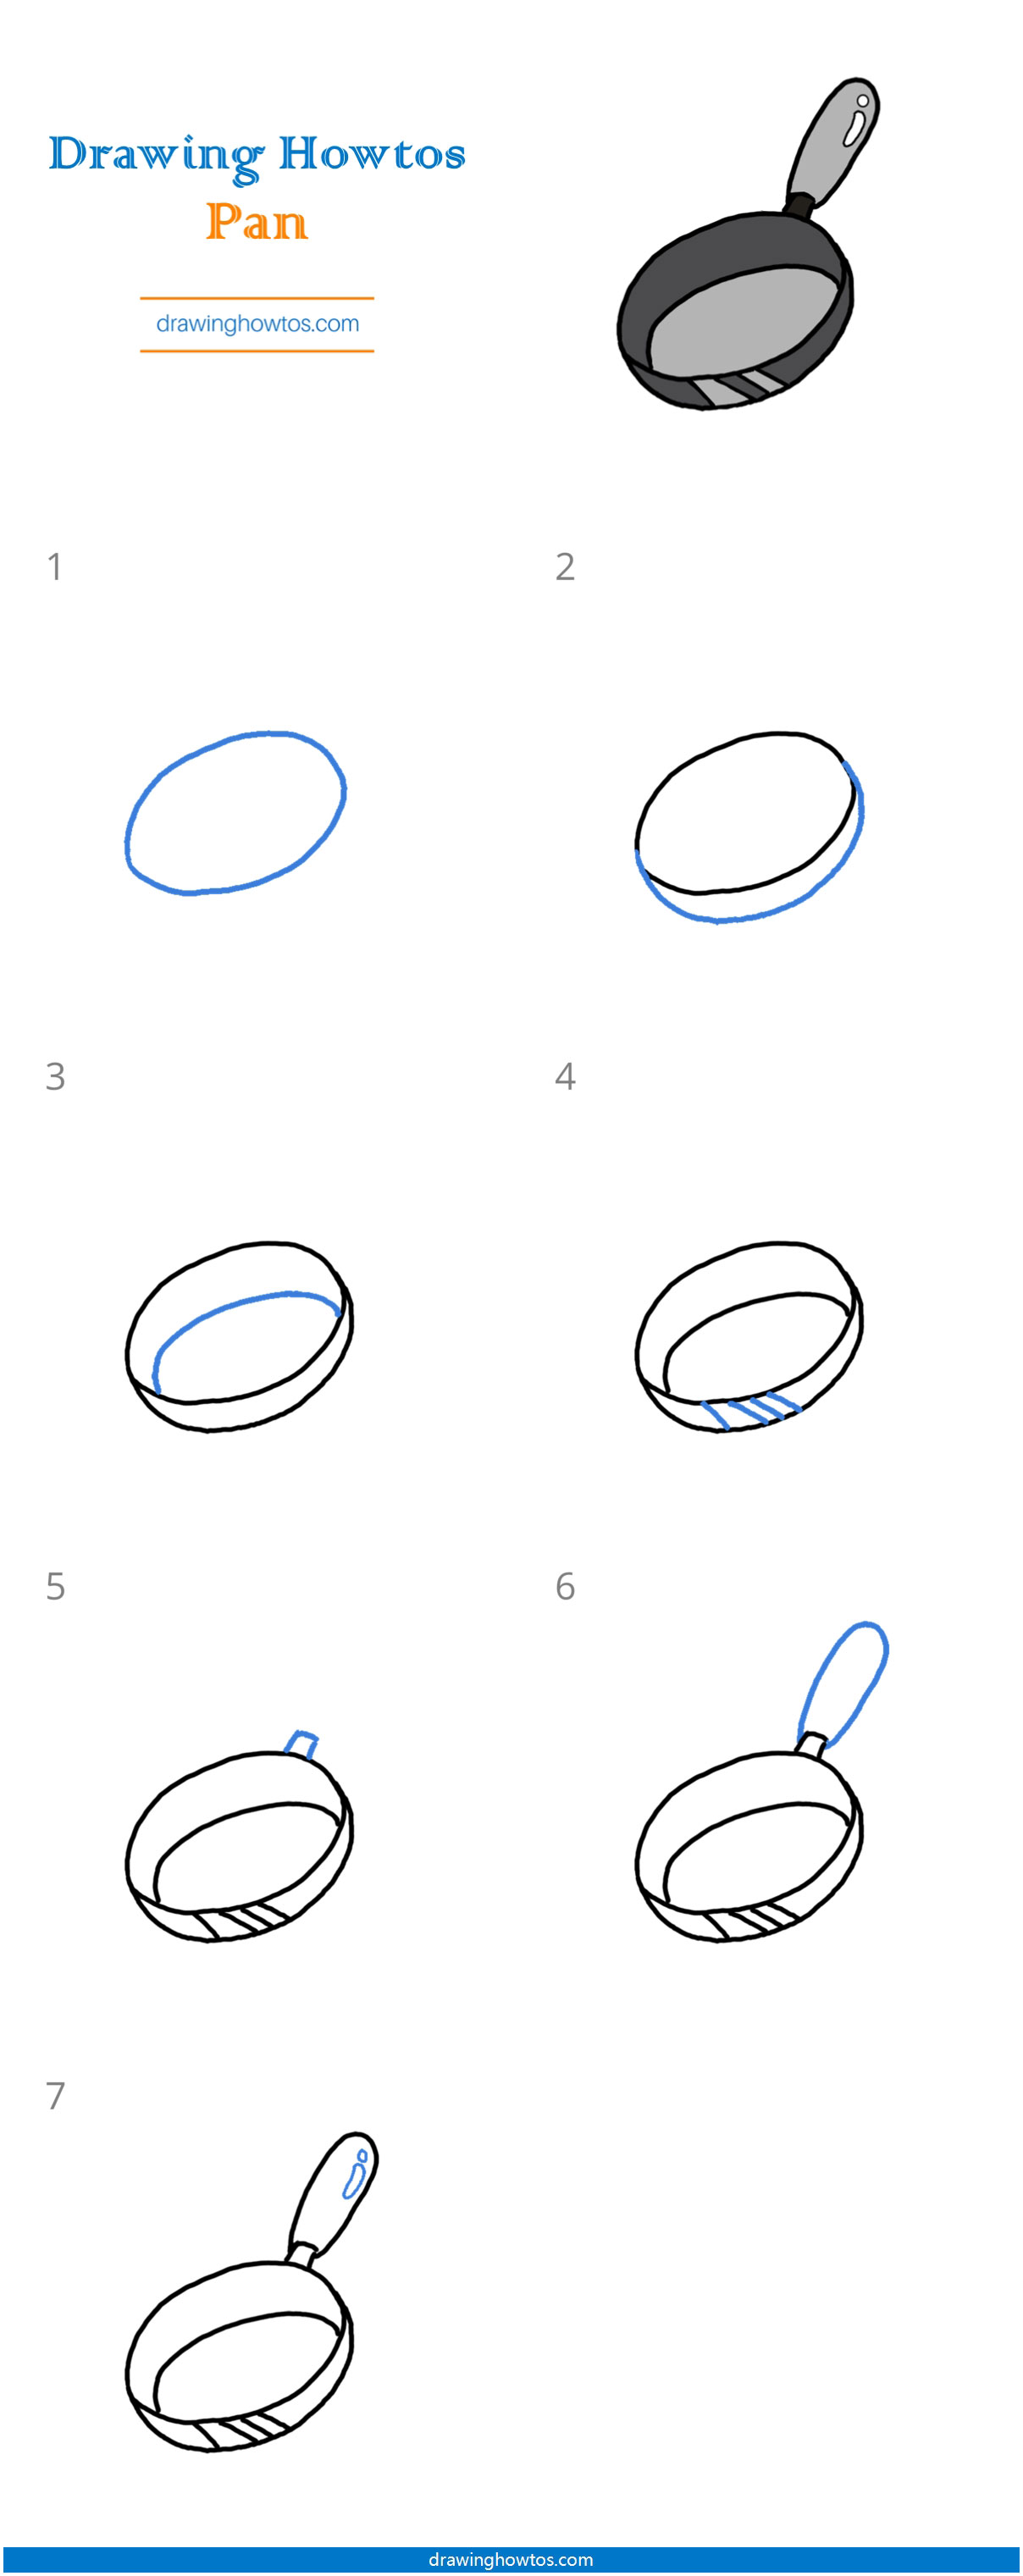 How to Draw a Pan Step by Step